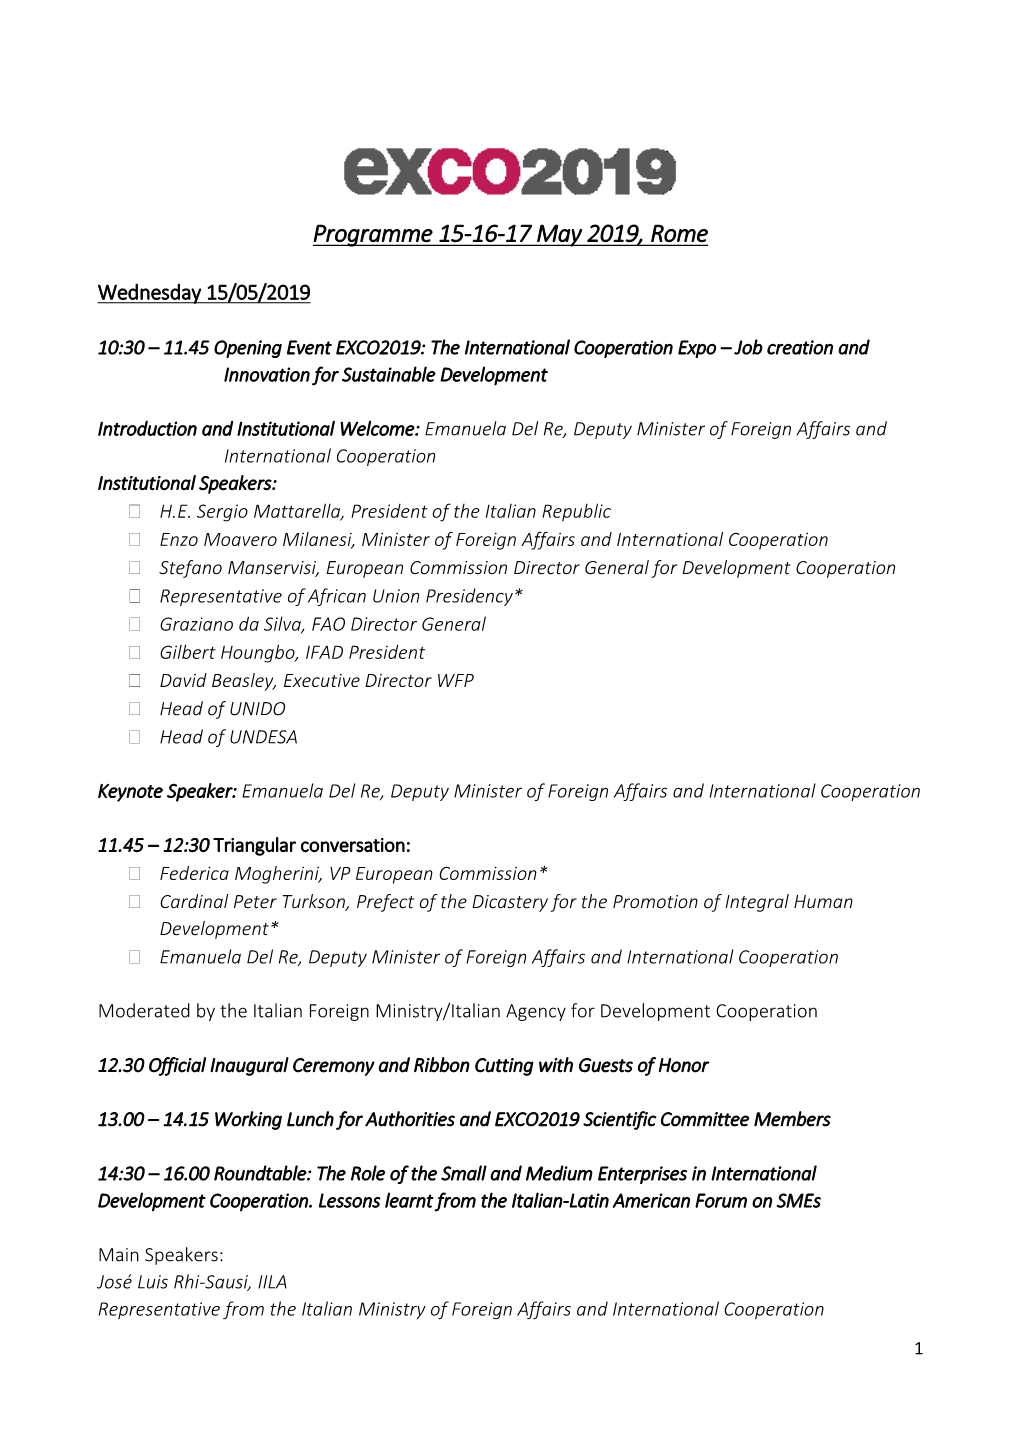 Programme 15-16-17 May 2019, Rome